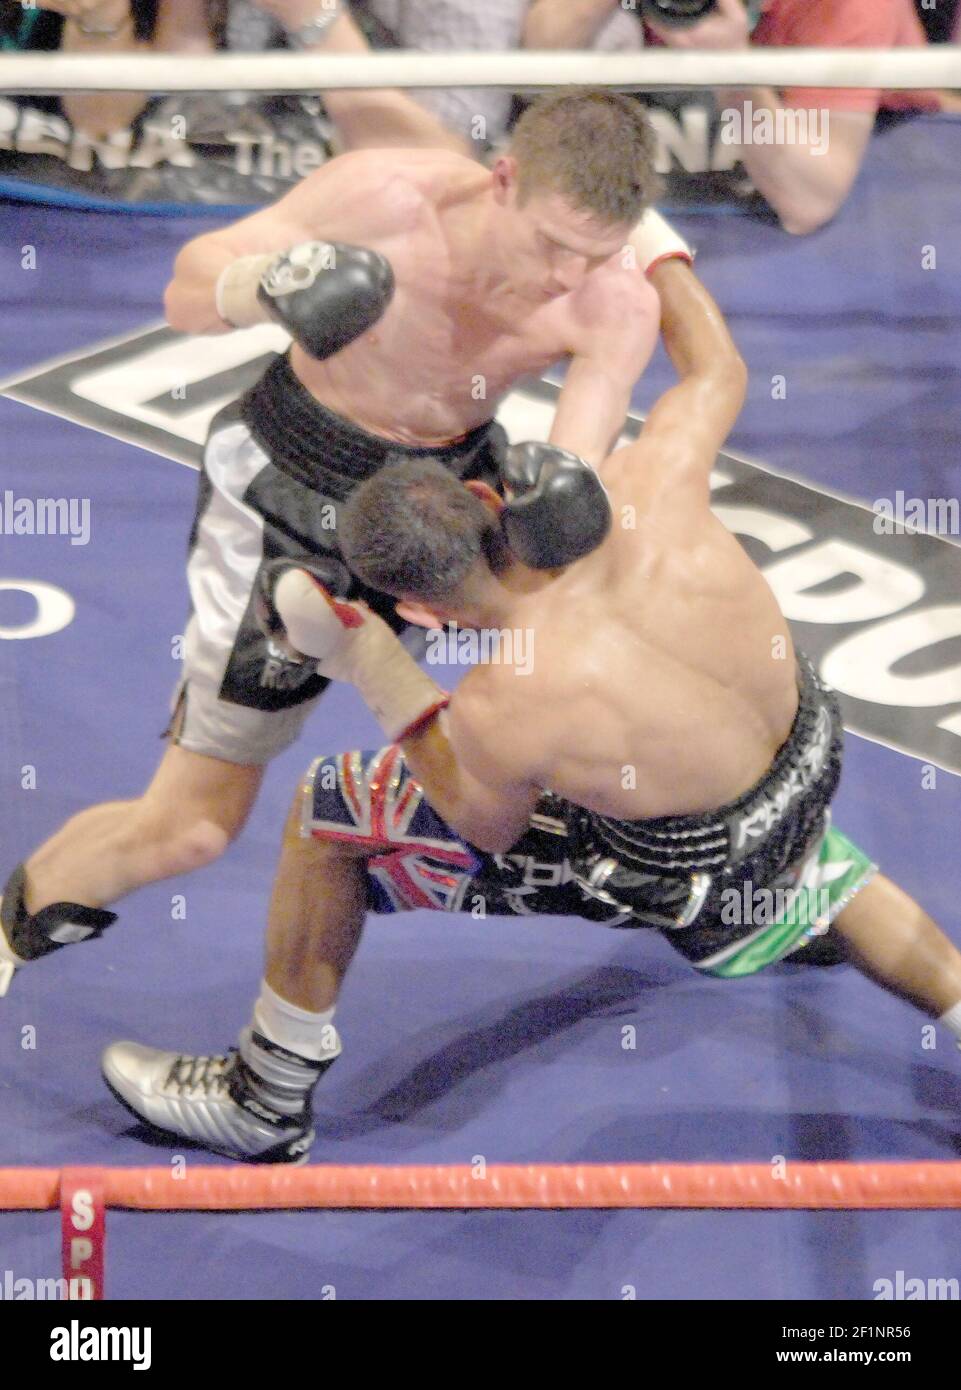 BOXING AMIR KHAN V WILLIE LIMOND FOR THE COMMONWEALTH LIGHWEIGHT TITLE AT THE O2 ARENA. KHAN KNOCKED DOWN.  14/7/2007 PICTURE DAVID ASHDOWN Stock Photo